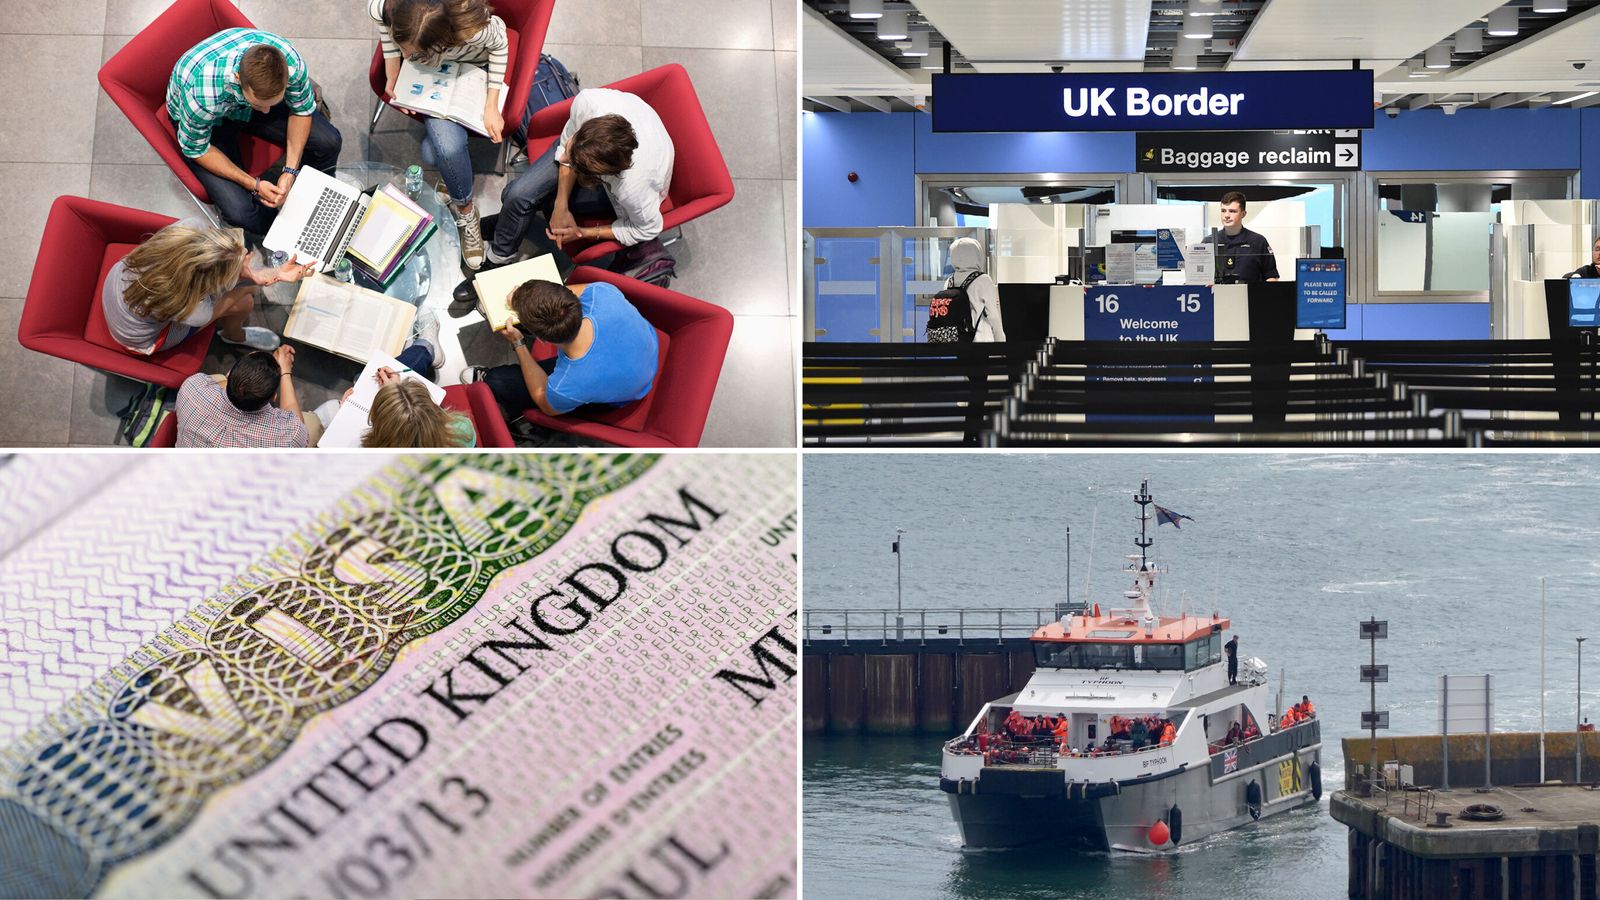 Net migration rises to new record calendar year figure of 606,000 in the 12 months to December 2022